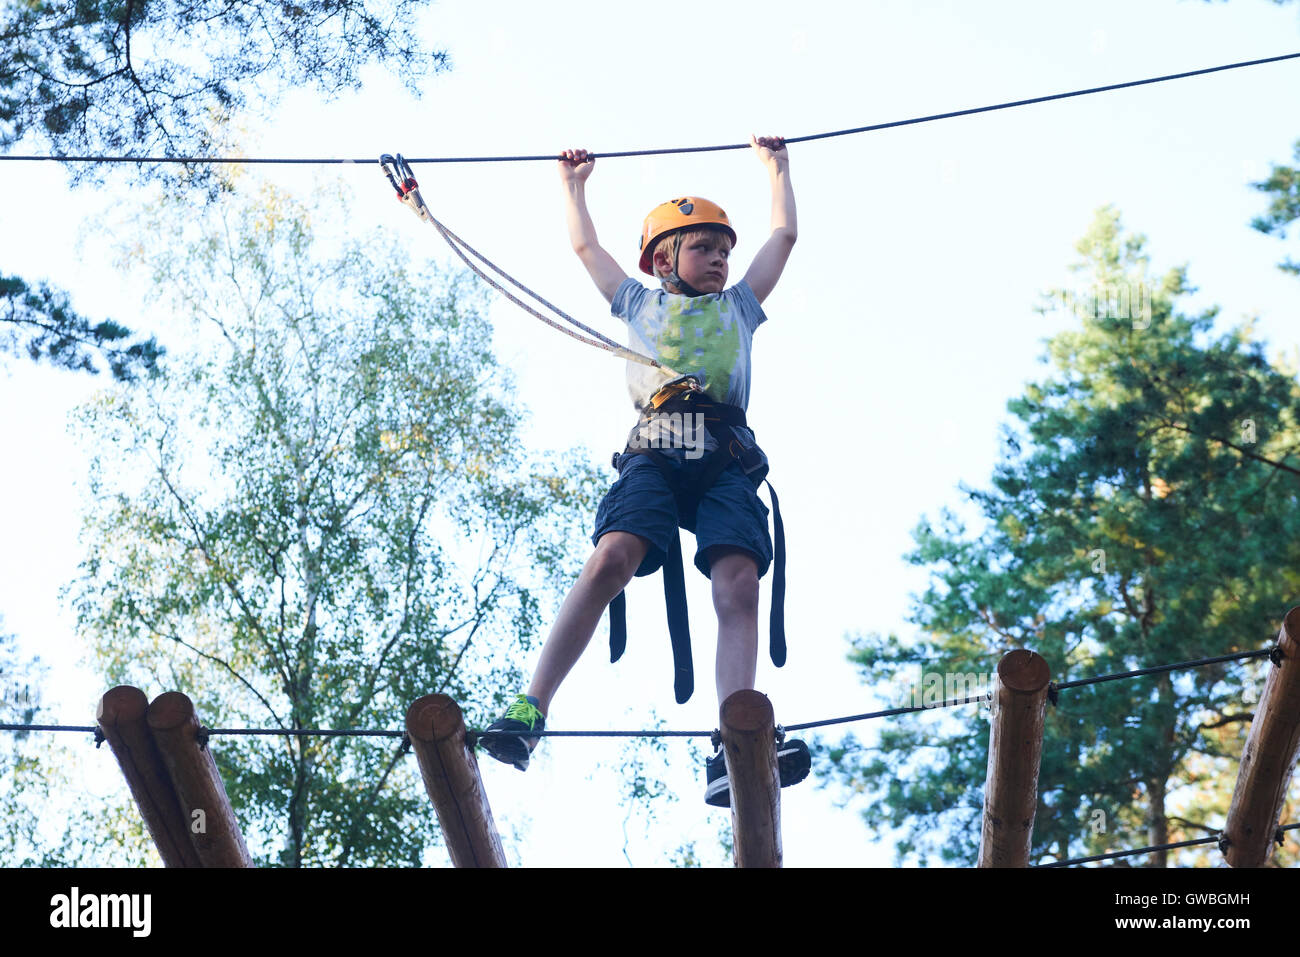 Portrait of active brave boy enjoying outbound climbing at adventure park on tree top Stock Photo